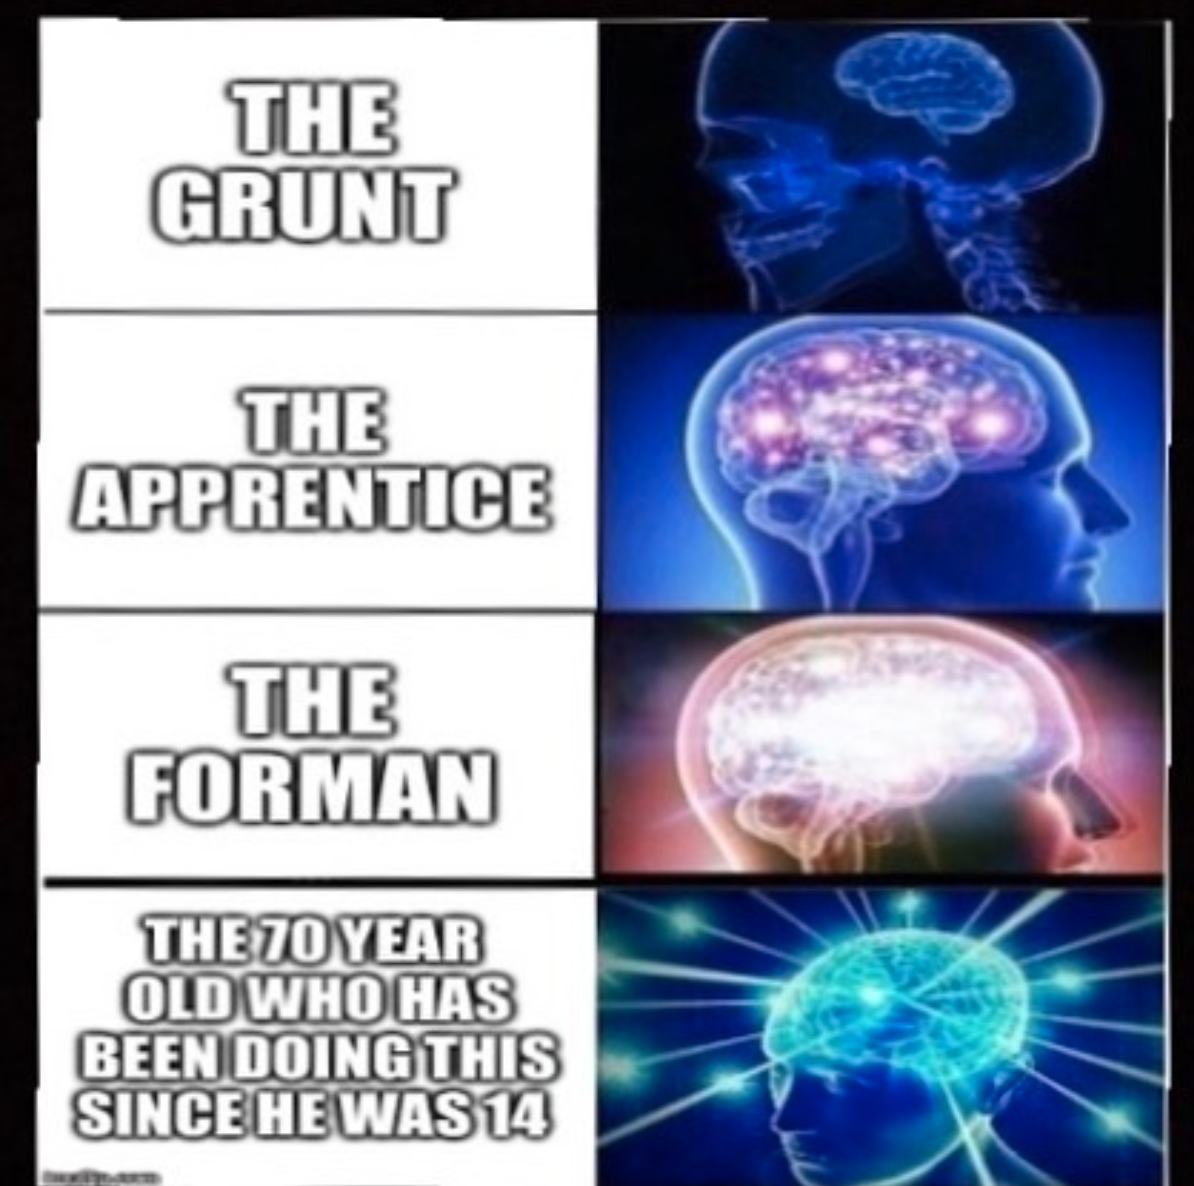 get that bread meme - The Grunt The Apprentice The Forman The To Year Old Who Has Been Doing This Since He Was 14